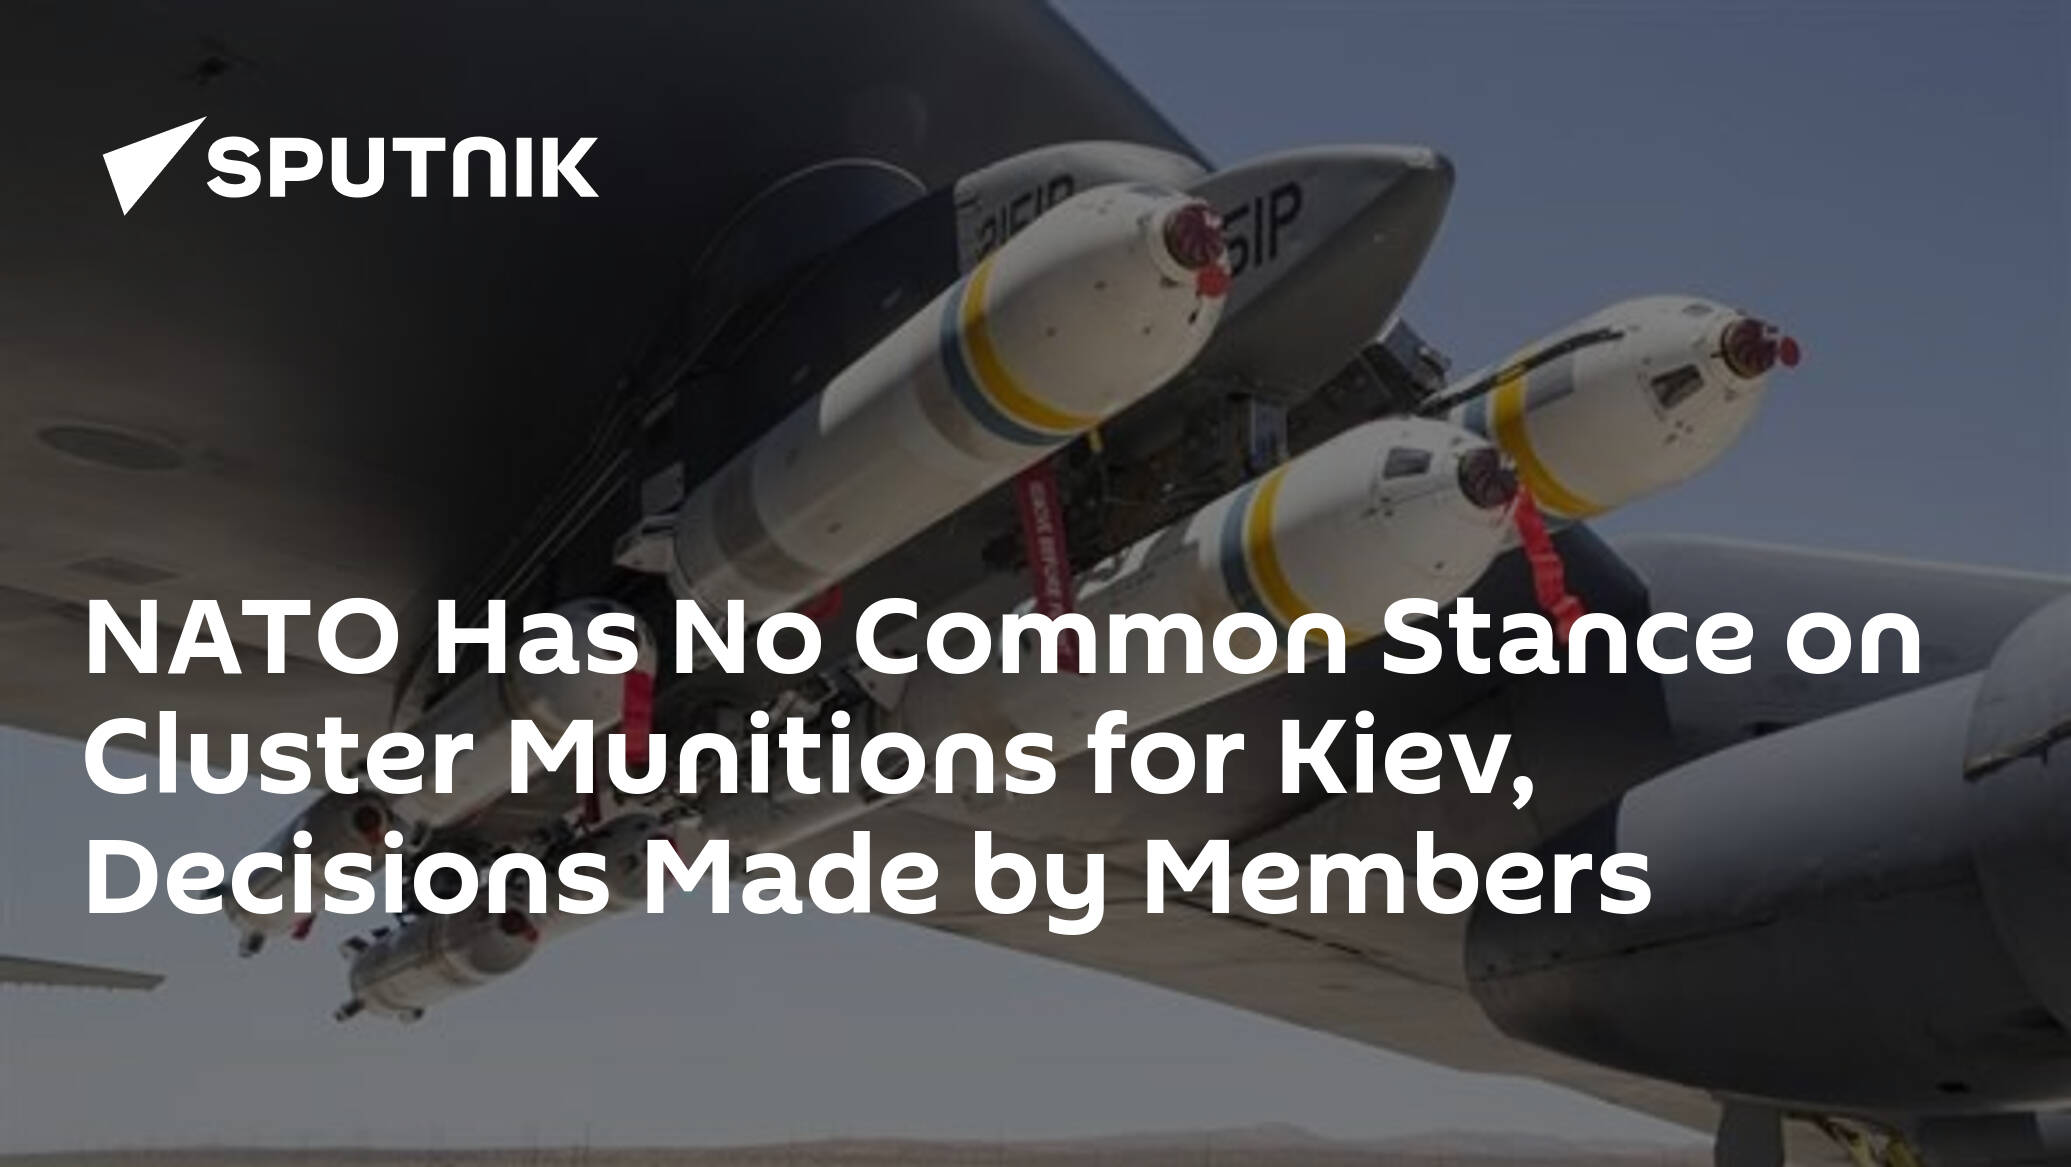 NATO Has No Common Stance on Cluster Munitions for Kiev, Decisions Made by Members